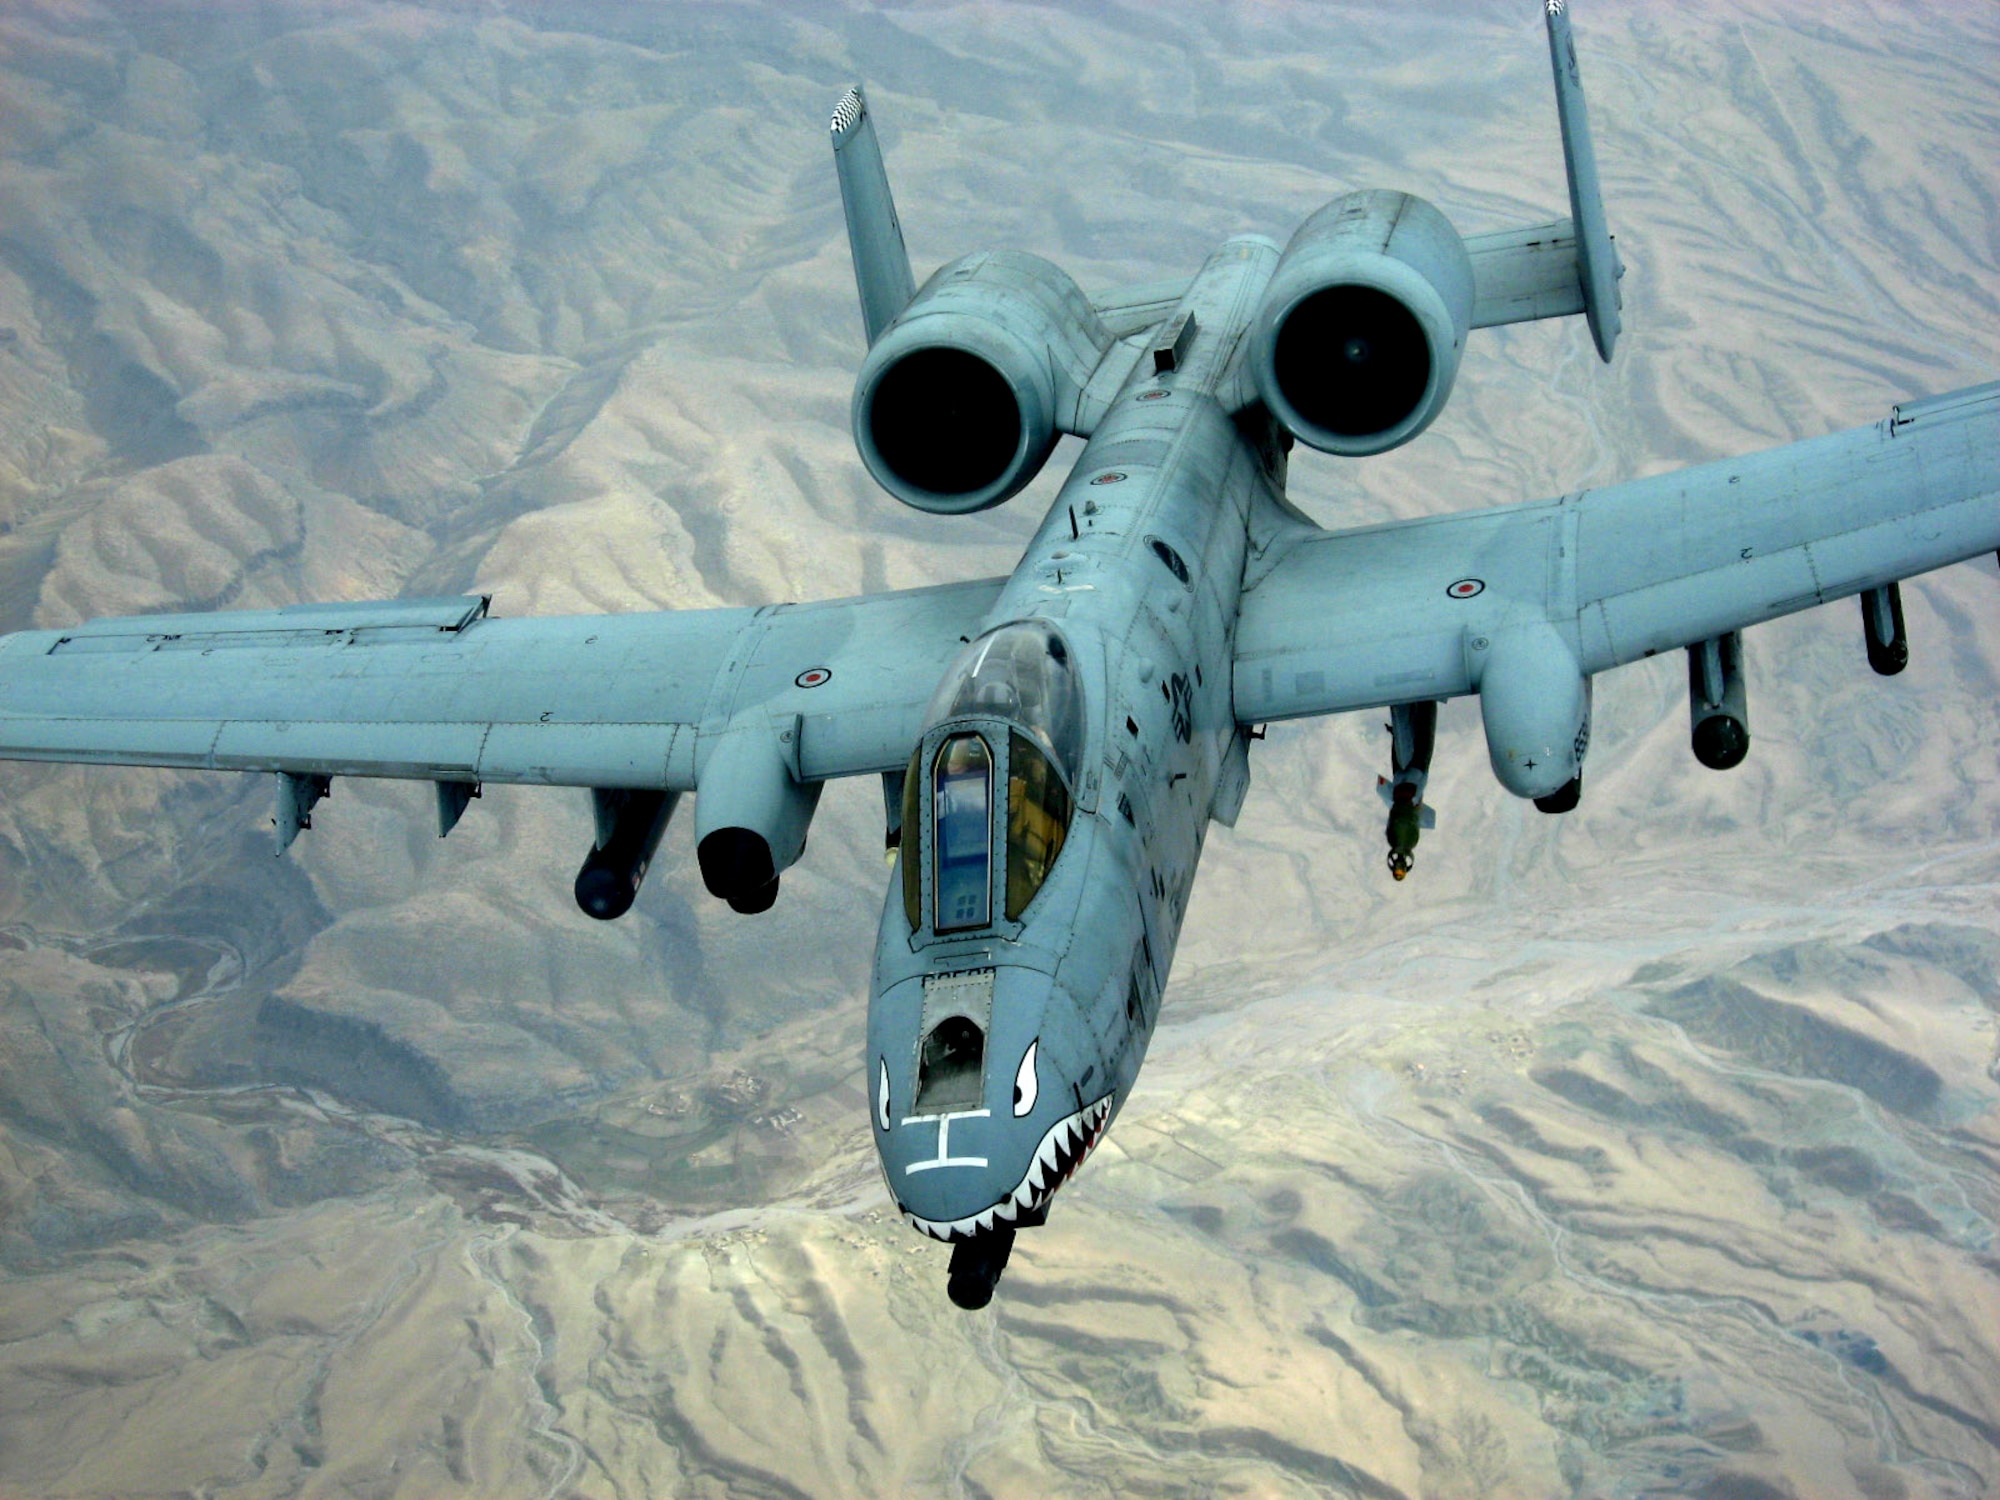 An A-10 Thunderbolt II, like this one, is among the various U.S. Central Command Air Forces air assets available for providing close-air support for International Security Assistance Force troops in contact with enemy forces in Iraq and Afghanistan. The A-10 is specially designed for close air support of ground forces and can be used against all ground targets, including tanks and other armored vehicles. (U.S. Air Force photo/Capt. Justin T. Watson) 